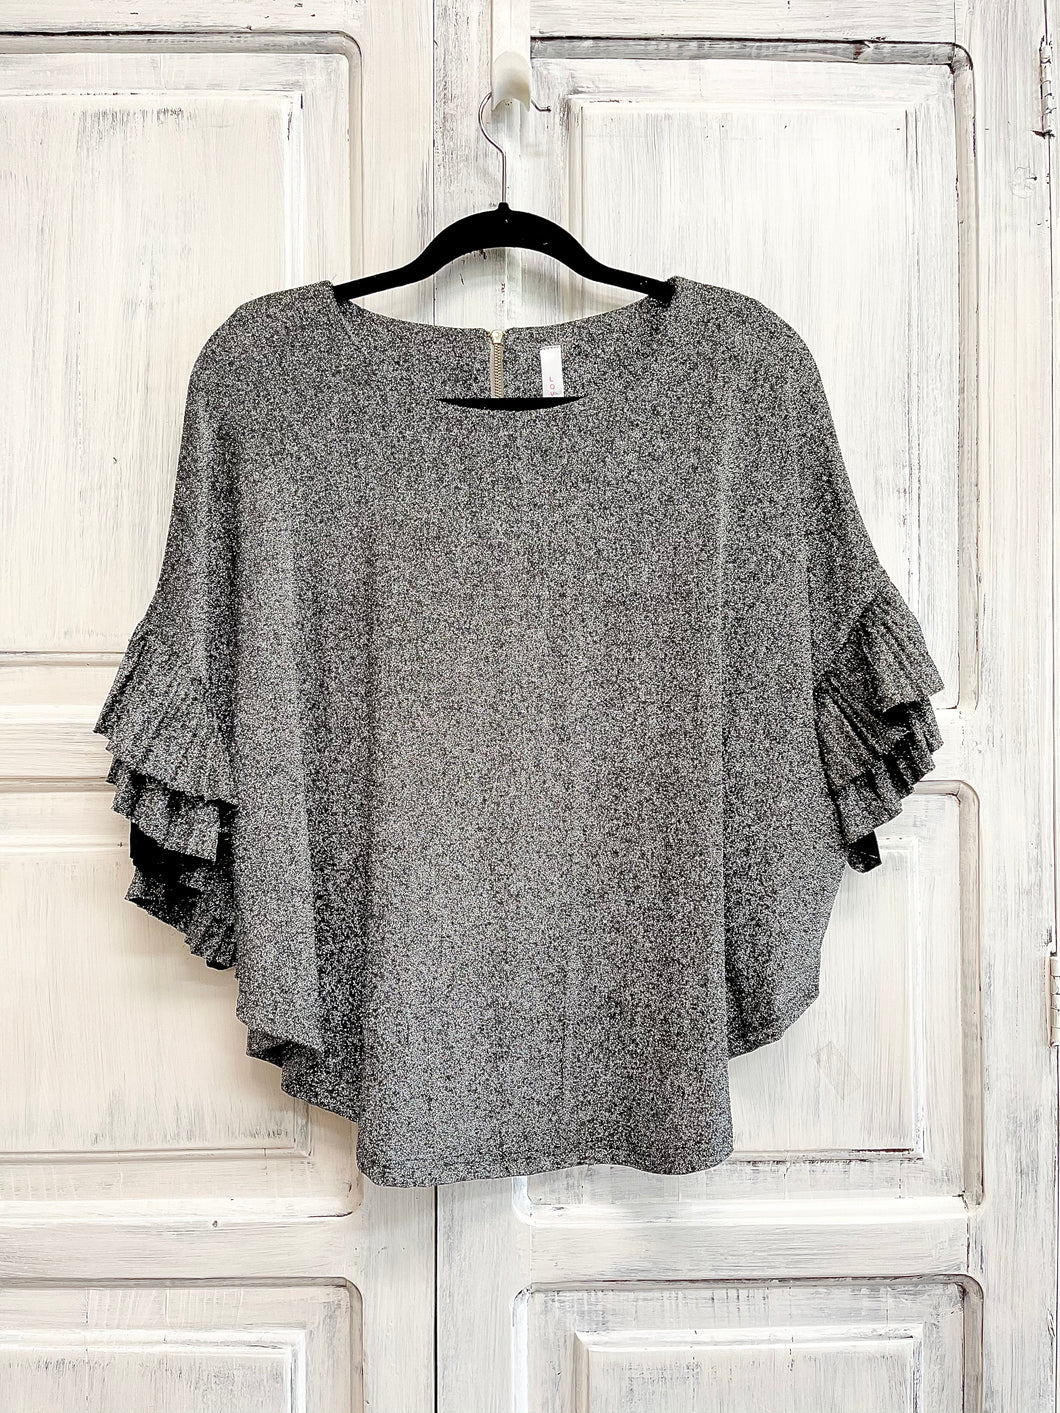 Ruffle sleeves sparkly top